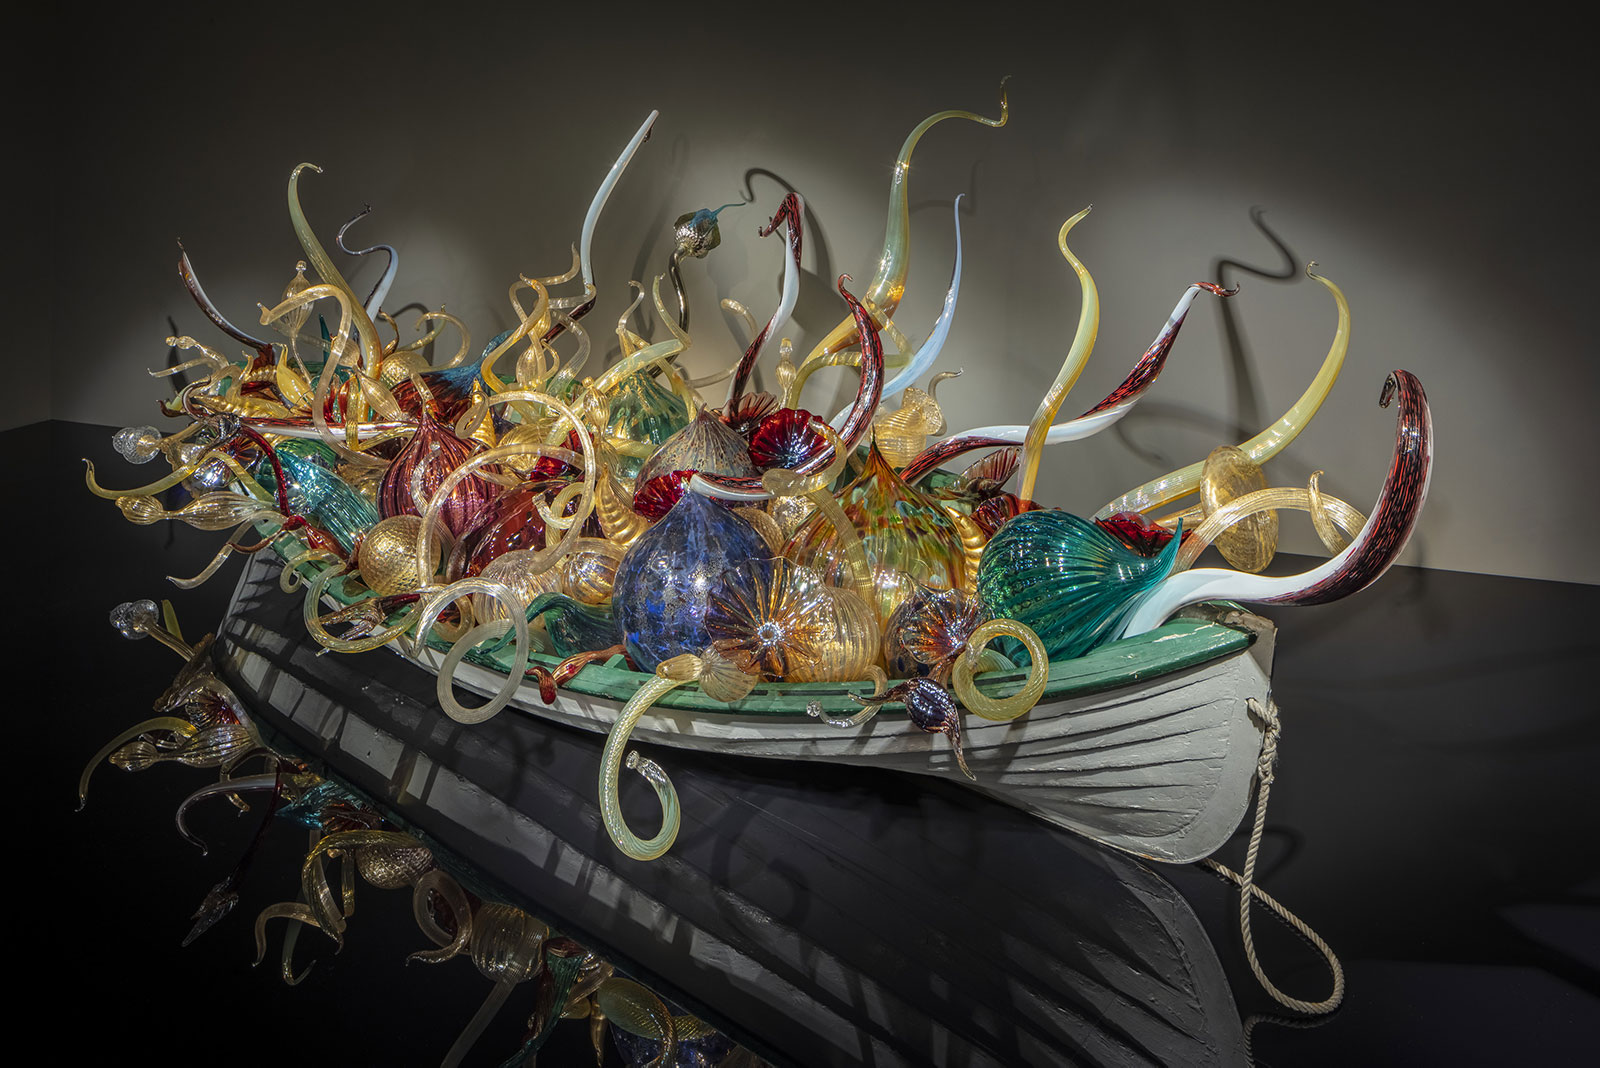 Gilded Fiori Boat (2020) by Dale Chihuly